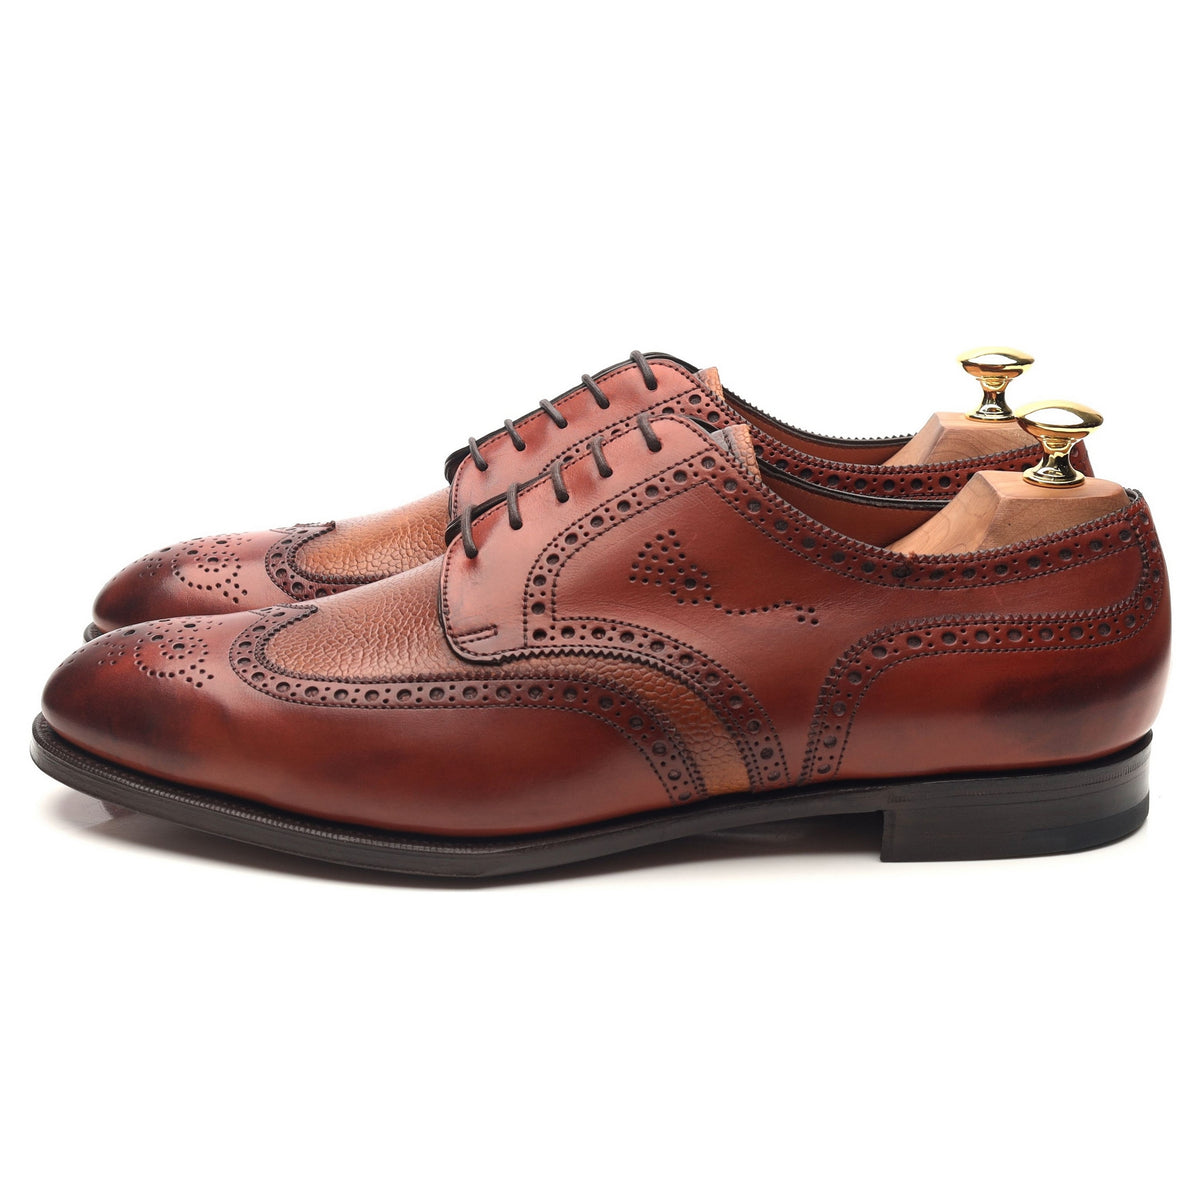 Sandringham' Tan Brown Leather Derby Brogues UK 9.5 D - Abbot's Shoes